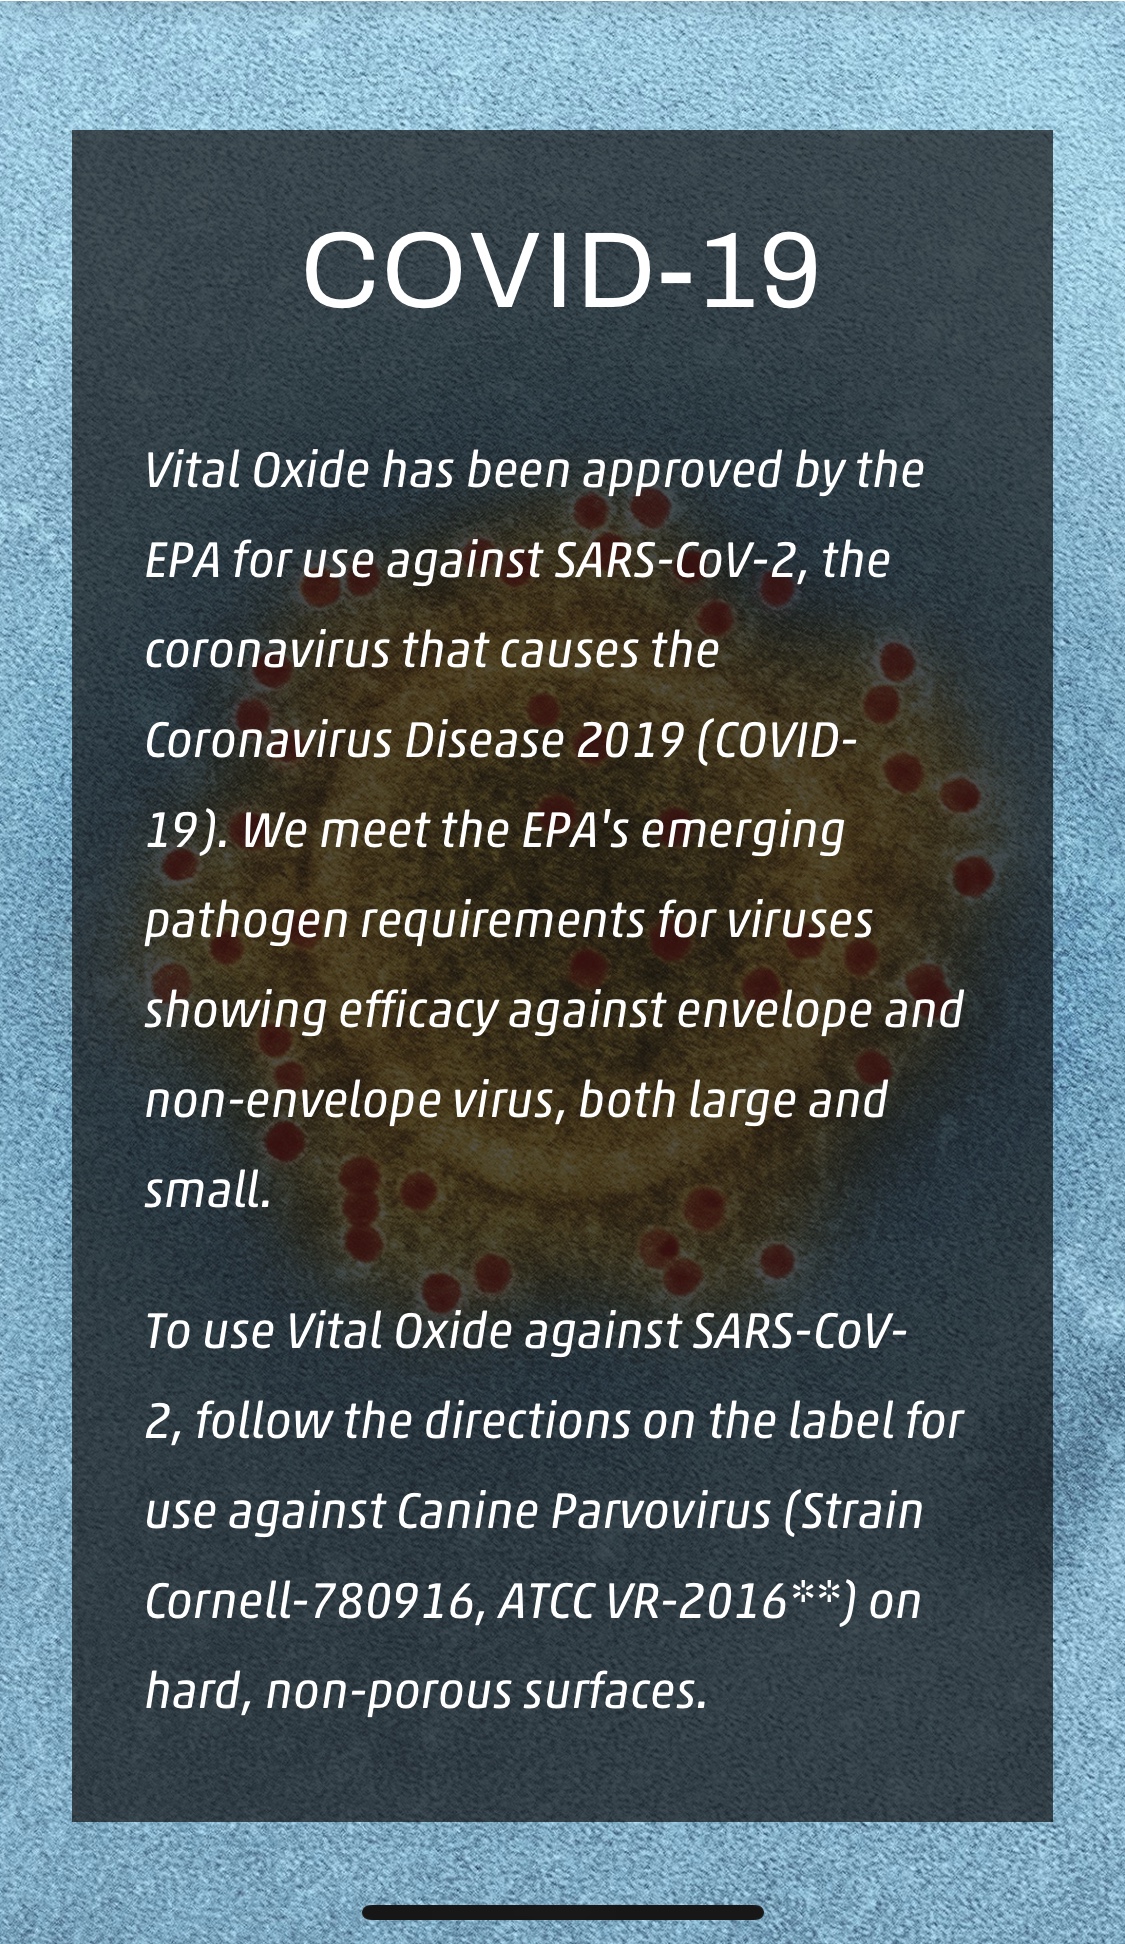 Vital Oxide approved by the EPA against SARS-CoV2 (Covid-19)